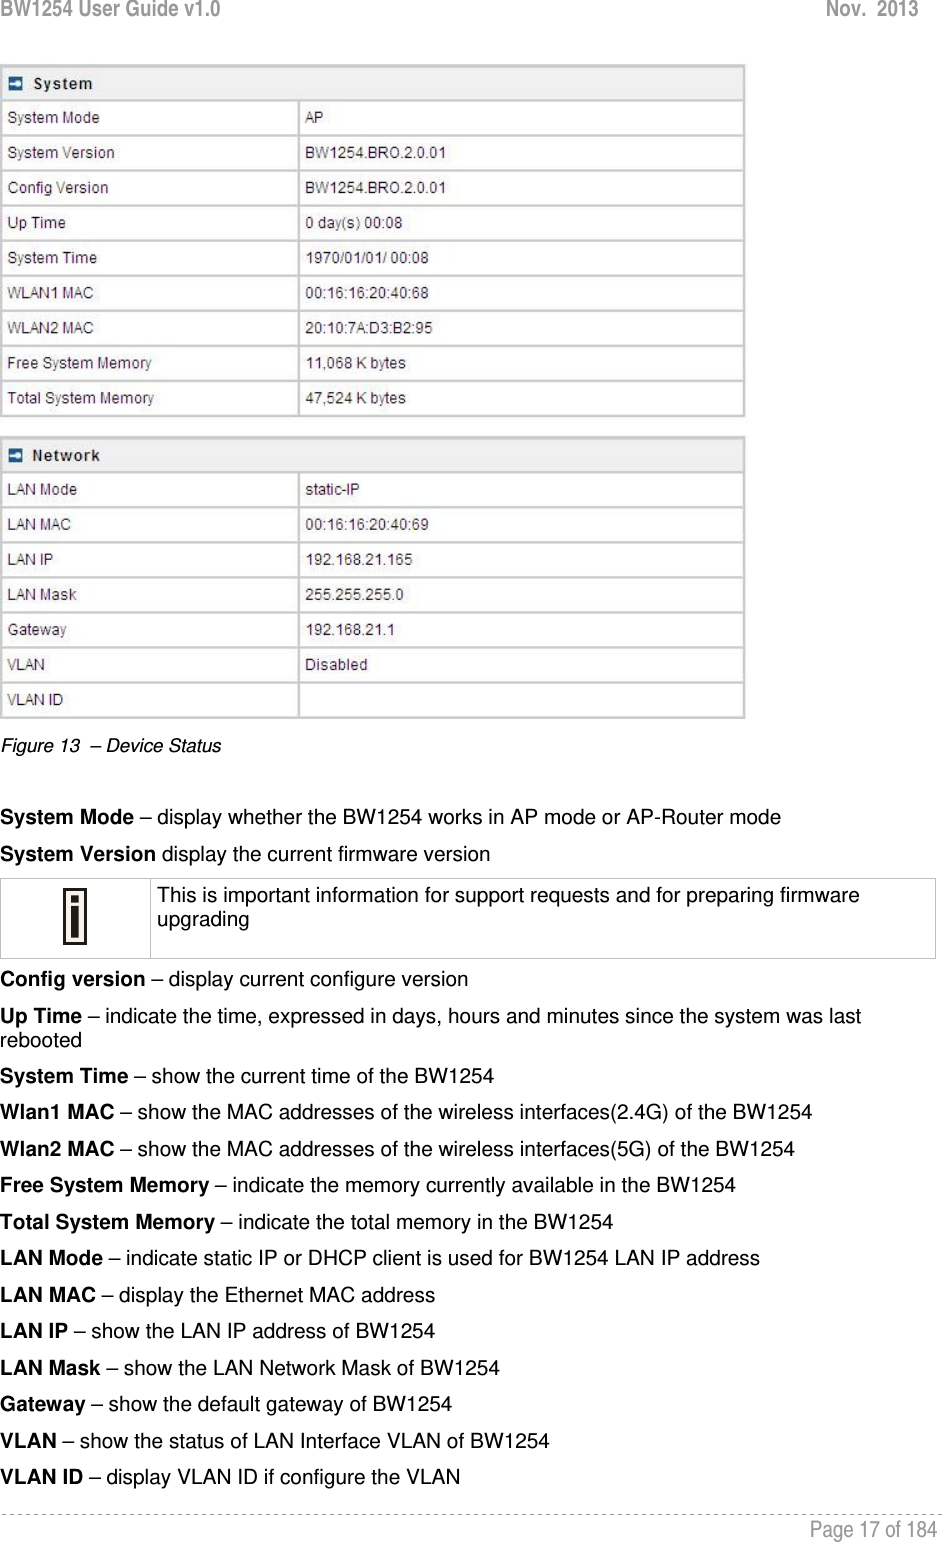 BW1254 User Guide v1.0  Nov.  2013     Page 17 of 184    Figure 13  – Device Status  System Mode – display whether the BW1254 works in AP mode or AP-Router mode System Version display the current firmware version  This is important information for support requests and for preparing firmware upgrading Config version – display current configure version Up Time – indicate the time, expressed in days, hours and minutes since the system was last rebooted System Time – show the current time of the BW1254 Wlan1 MAC – show the MAC addresses of the wireless interfaces(2.4G) of the BW1254 Wlan2 MAC – show the MAC addresses of the wireless interfaces(5G) of the BW1254 Free System Memory – indicate the memory currently available in the BW1254 Total System Memory – indicate the total memory in the BW1254 LAN Mode – indicate static IP or DHCP client is used for BW1254 LAN IP address LAN MAC – display the Ethernet MAC address LAN IP – show the LAN IP address of BW1254 LAN Mask – show the LAN Network Mask of BW1254 Gateway – show the default gateway of BW1254 VLAN – show the status of LAN Interface VLAN of BW1254 VLAN ID – display VLAN ID if configure the VLAN 